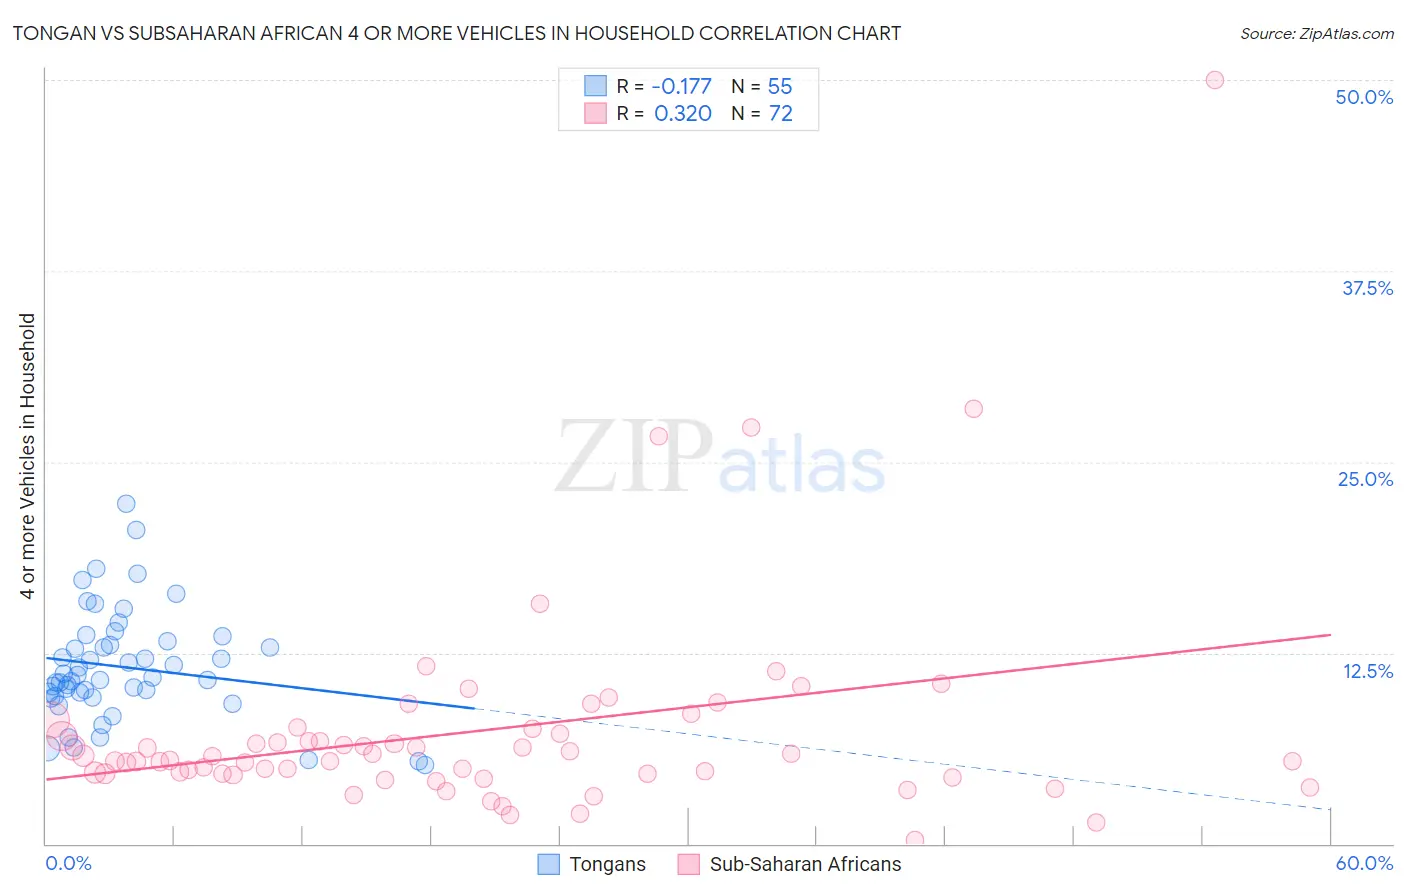 Tongan vs Subsaharan African 4 or more Vehicles in Household